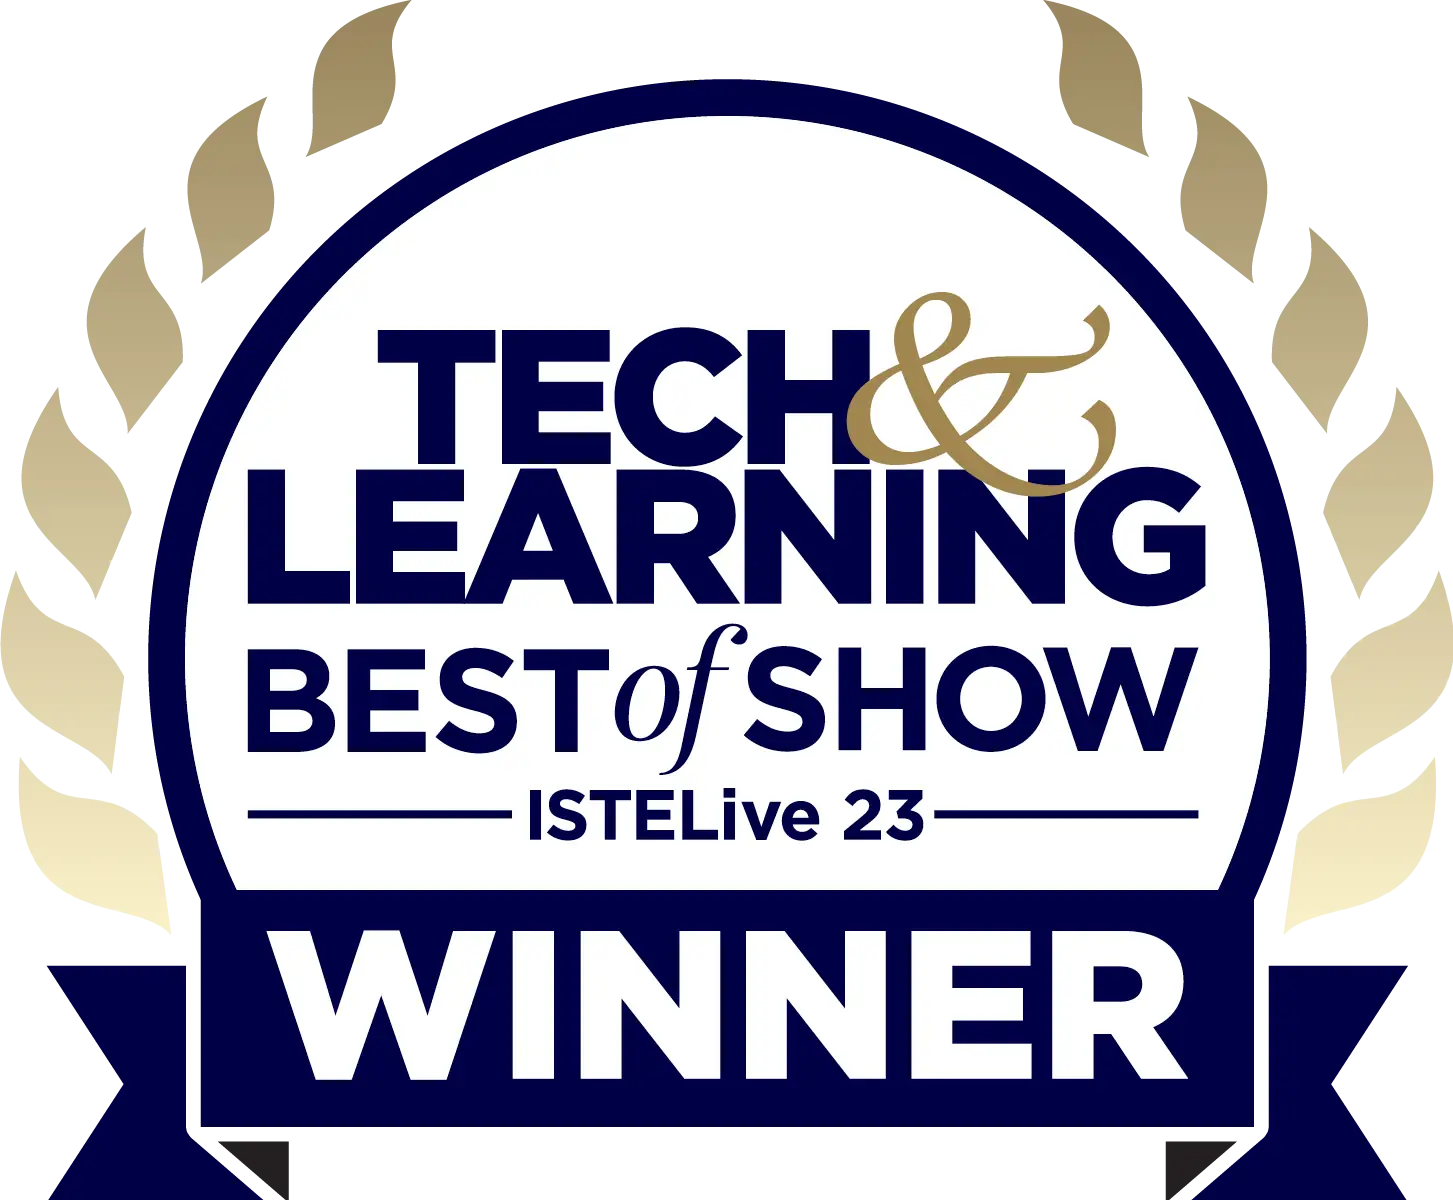 Tech & Learning Best of Show ISTELive 23